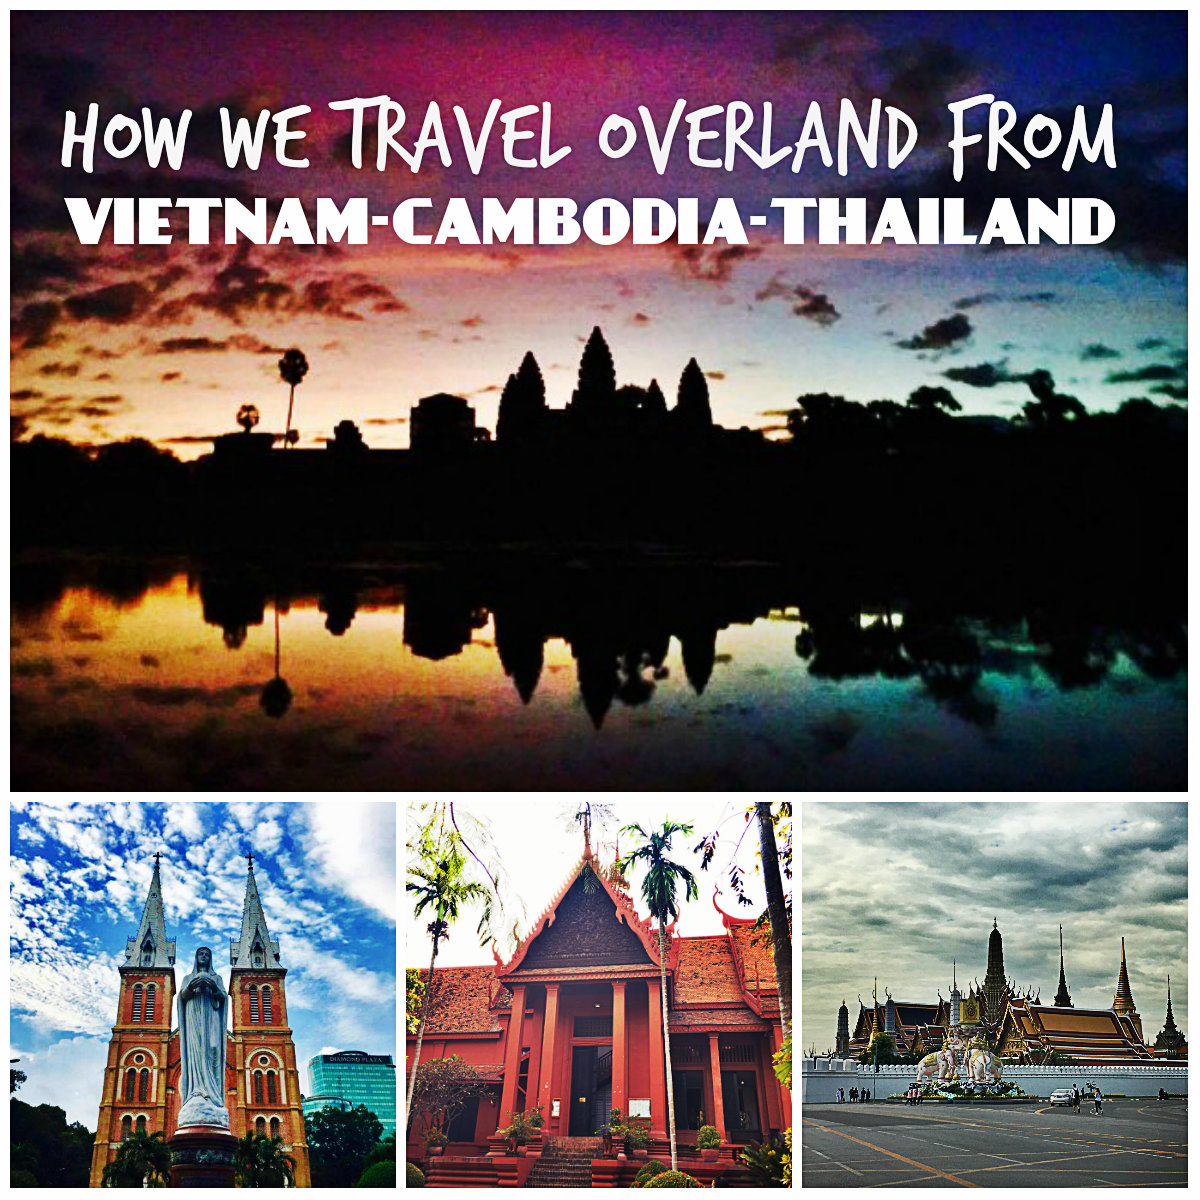 trips to cambodia vietnam and thailand